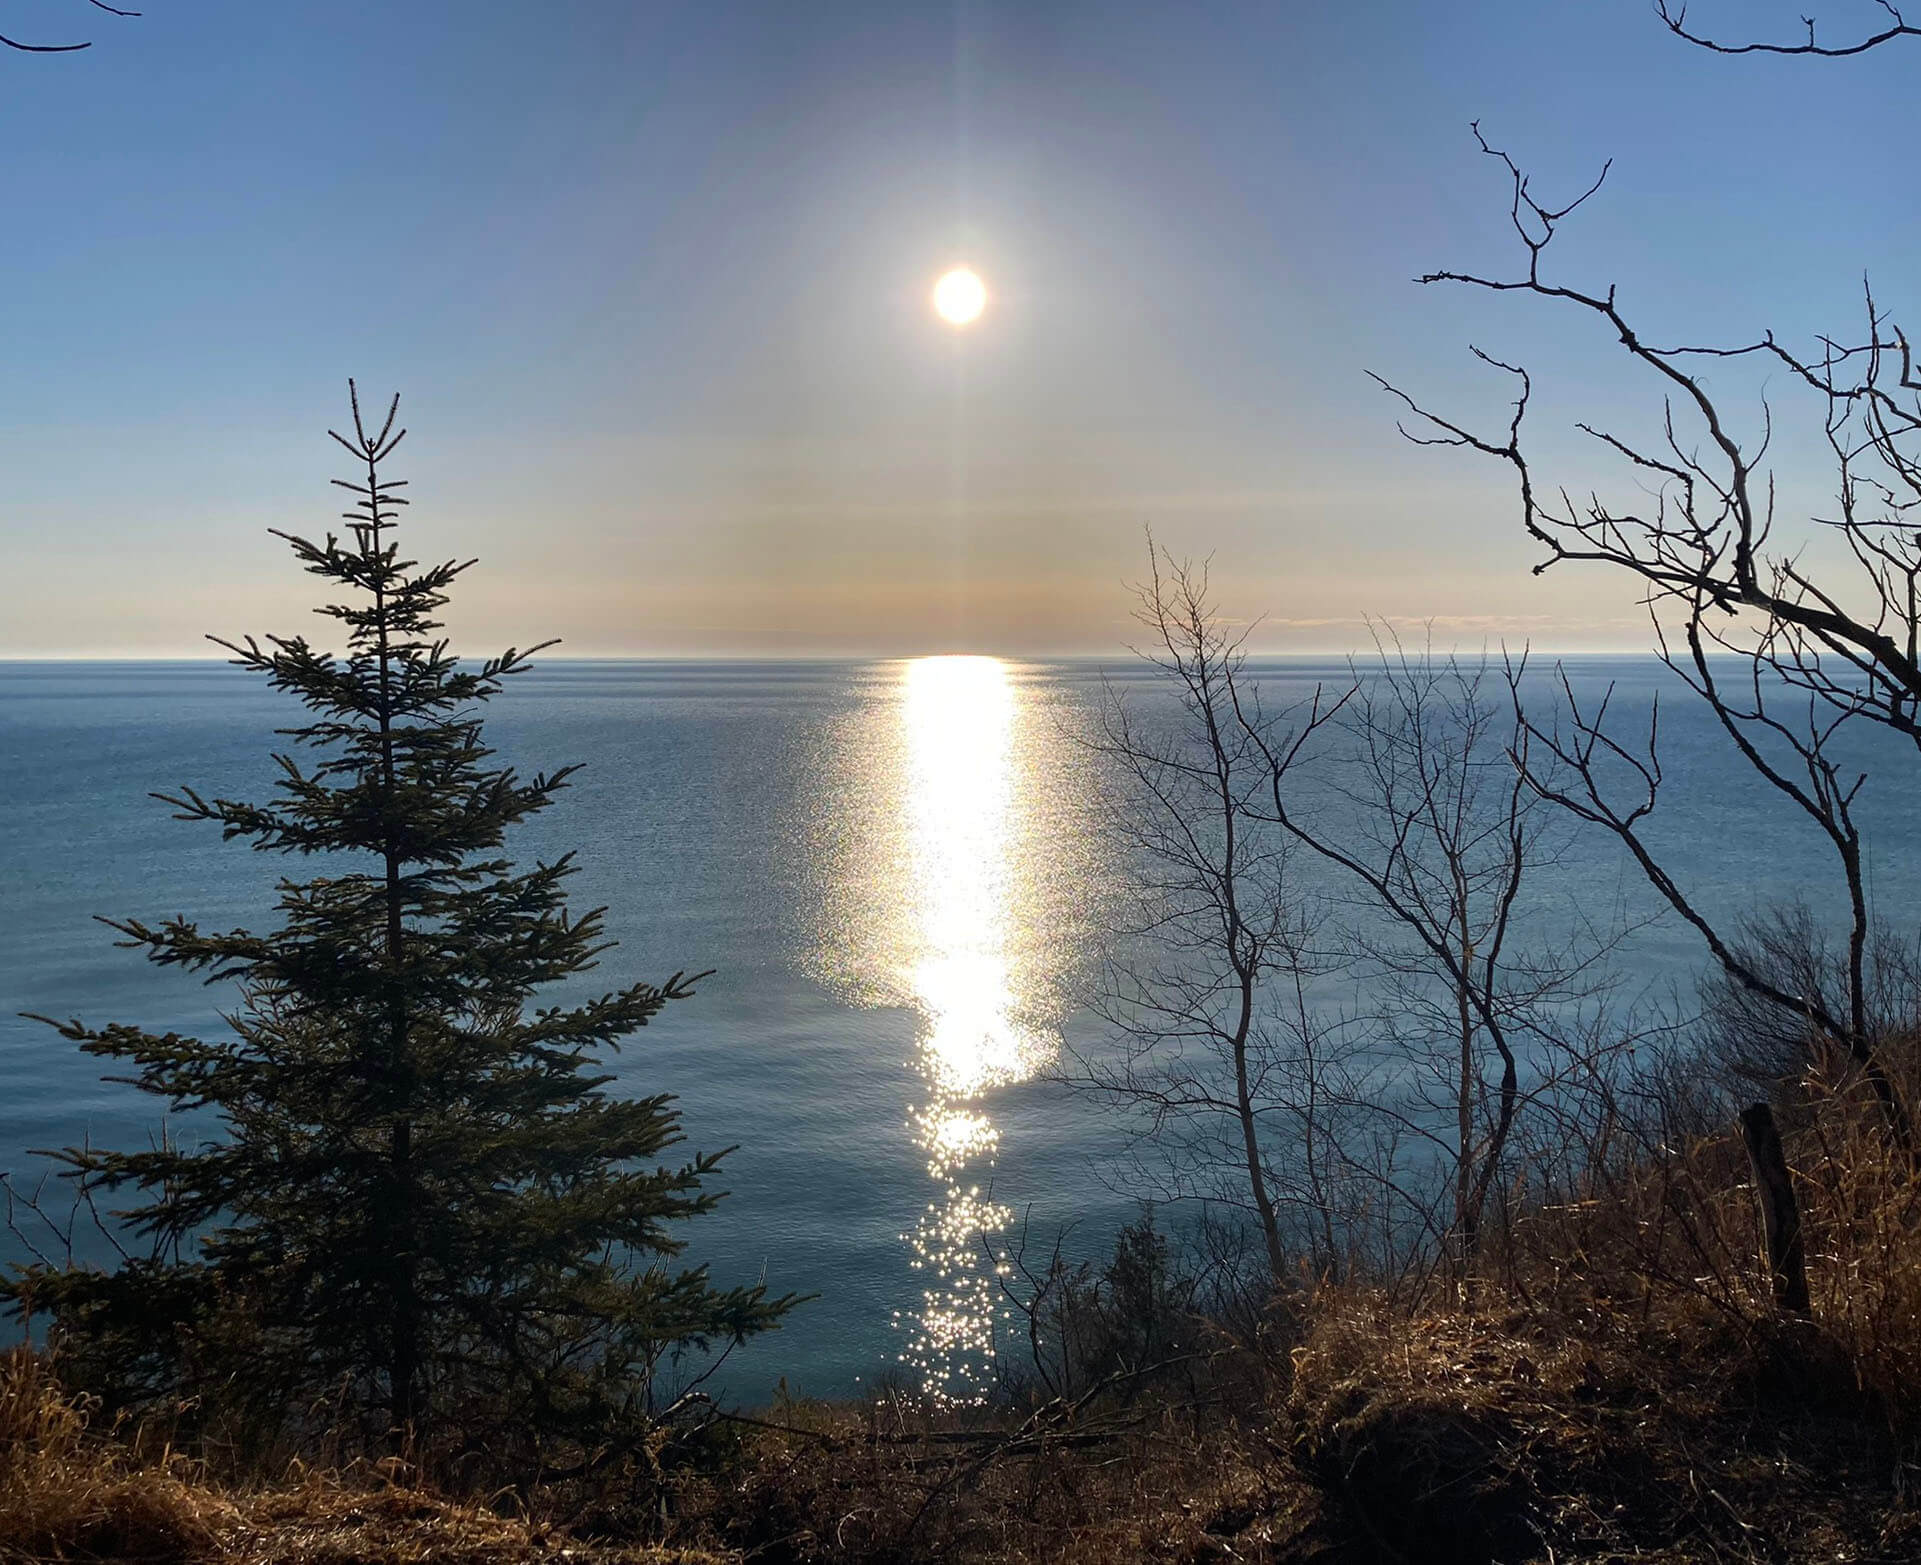 Knowles-Nelson Stewardship Program - a late winter day at Lion's Den Gorge with the sun showing through a hazy sky over Lake Michigan and trees without any leaves along the shoreline